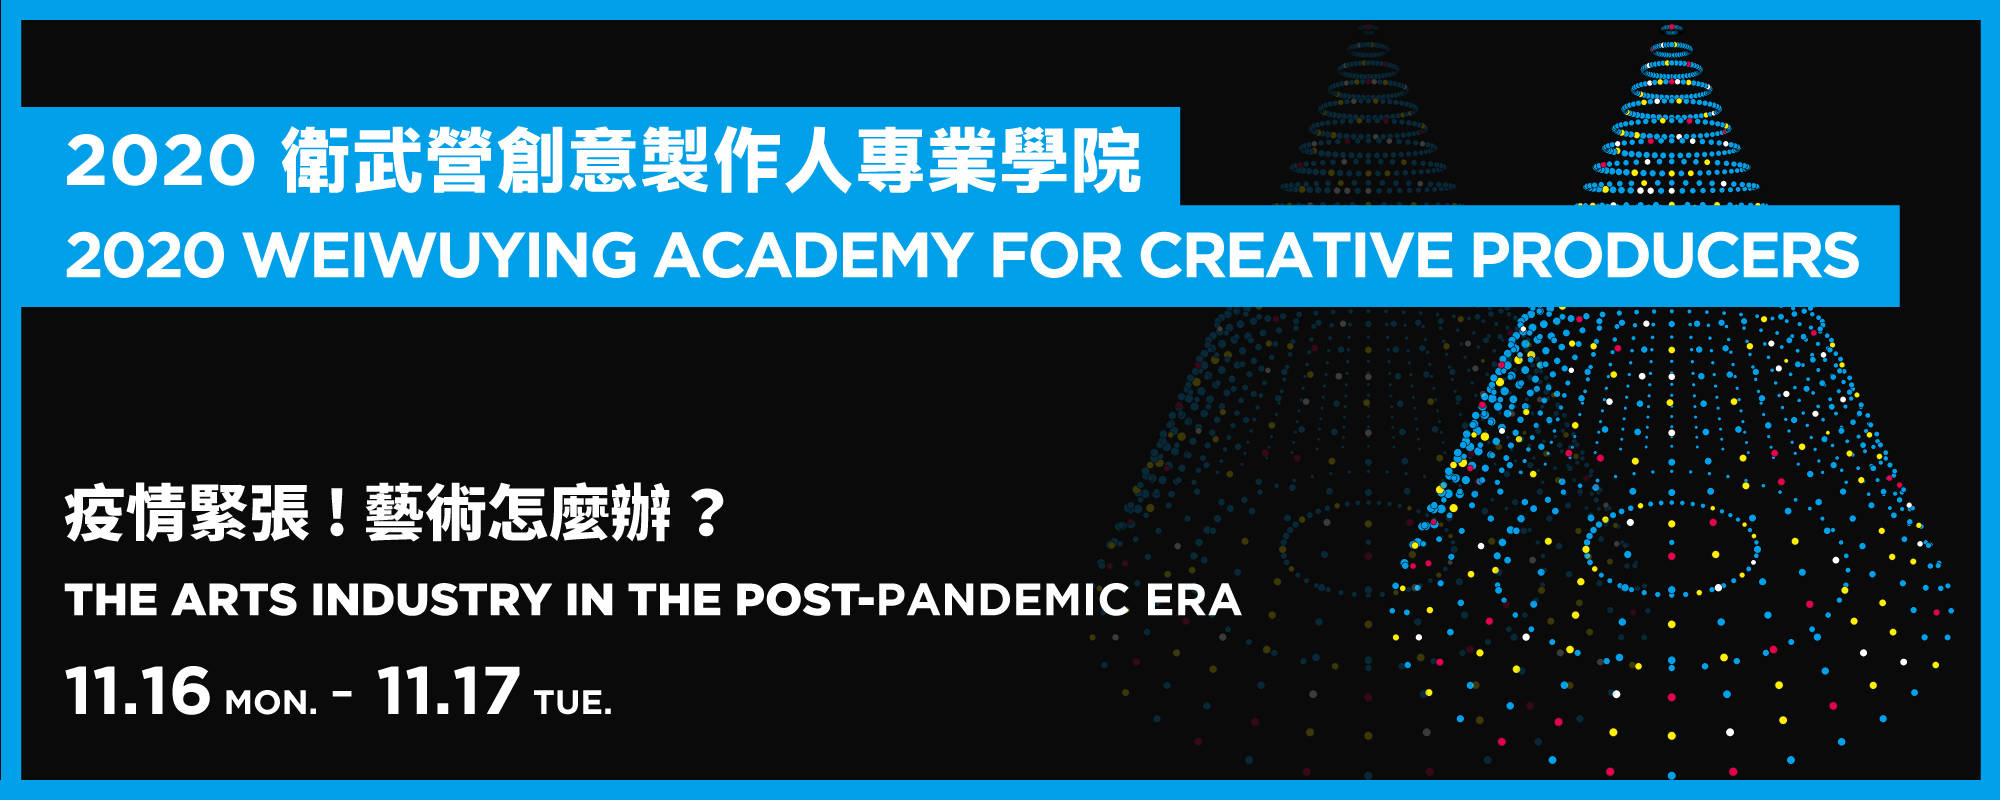 2020 Weiwuying Academy for Creative Producers